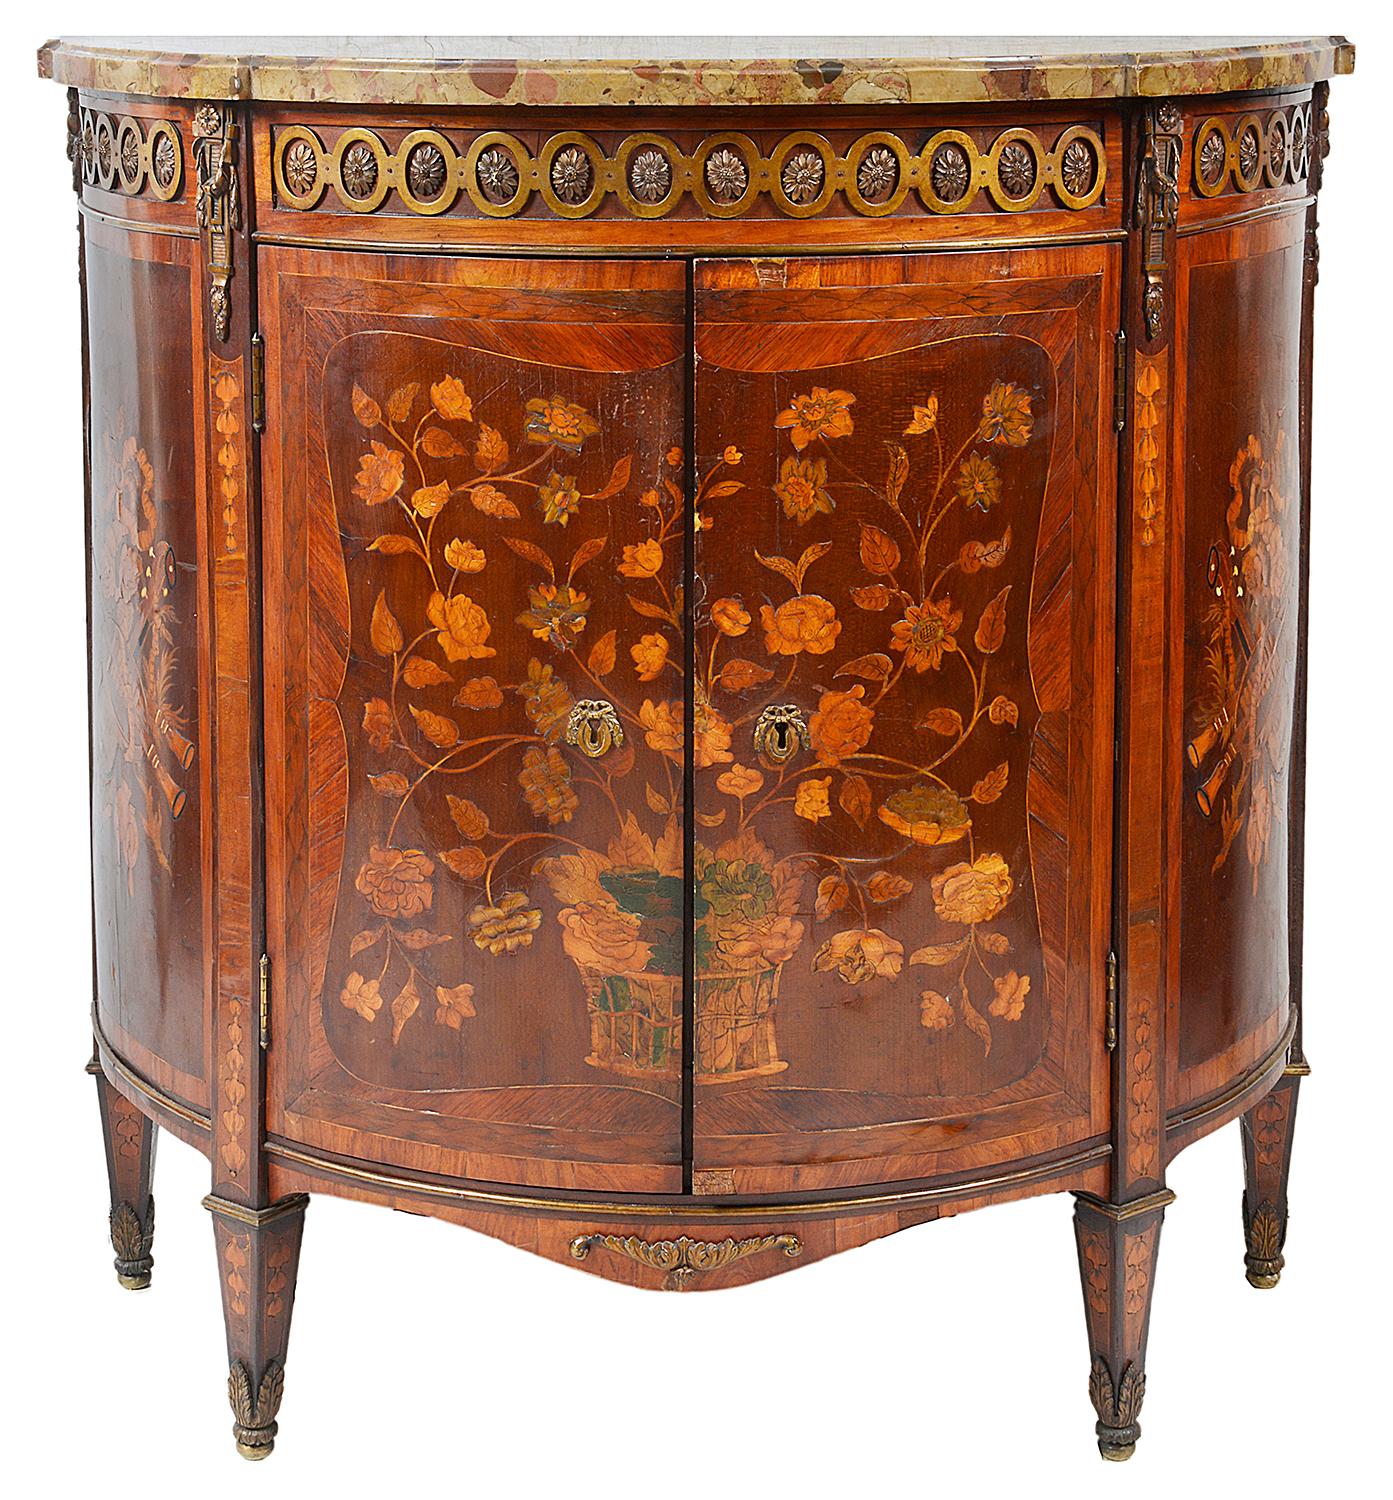 A good quality pair of late 18th century marble topped, marquetry inlaid side cabinets, each with their original marble tops, scrolling ormolu mounts to the frieze, wonderful floral marquetry to the central doors, inlaid musical instruments with